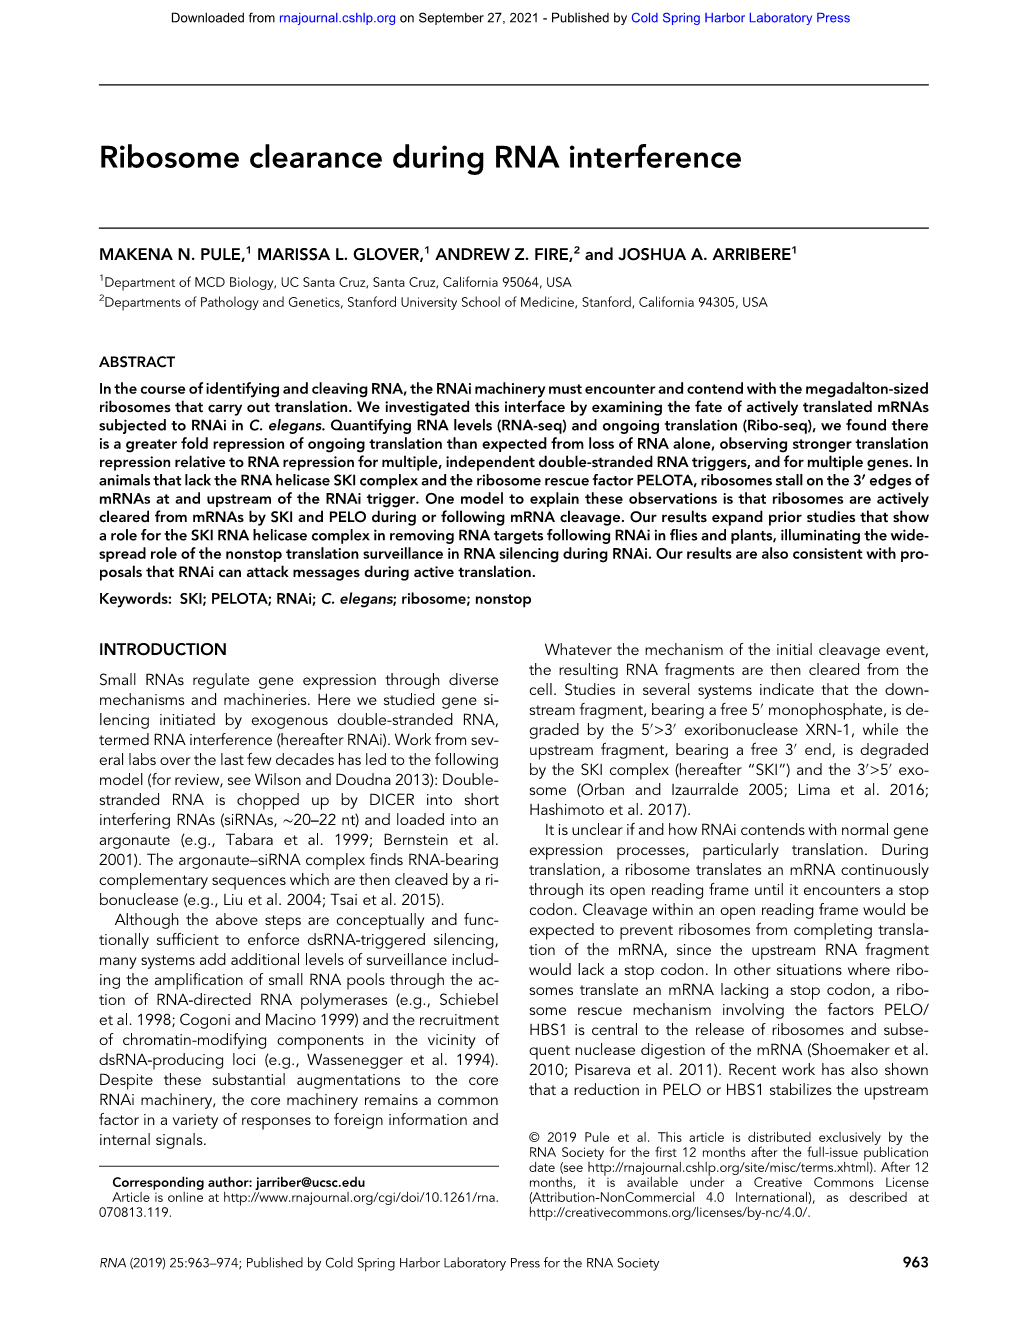 Ribosome Clearance During RNA Interference